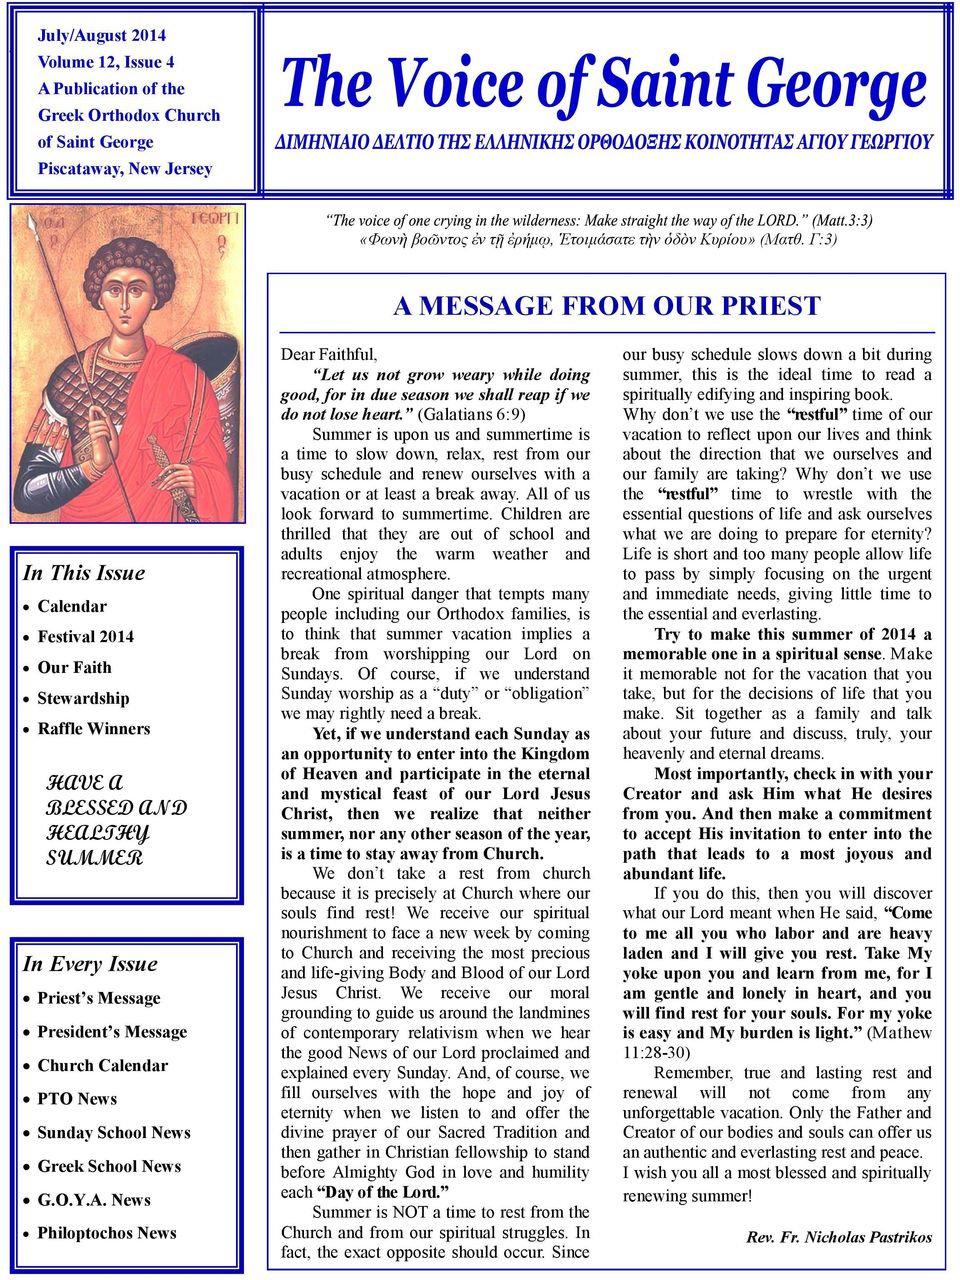 Calendar PTO News Sunday School News Greek School News G.O.Y.A. News Philoptochos News Dear Faithful, Let us not grow weary while doing good, for in due season we shall reap if we do not lose heart.